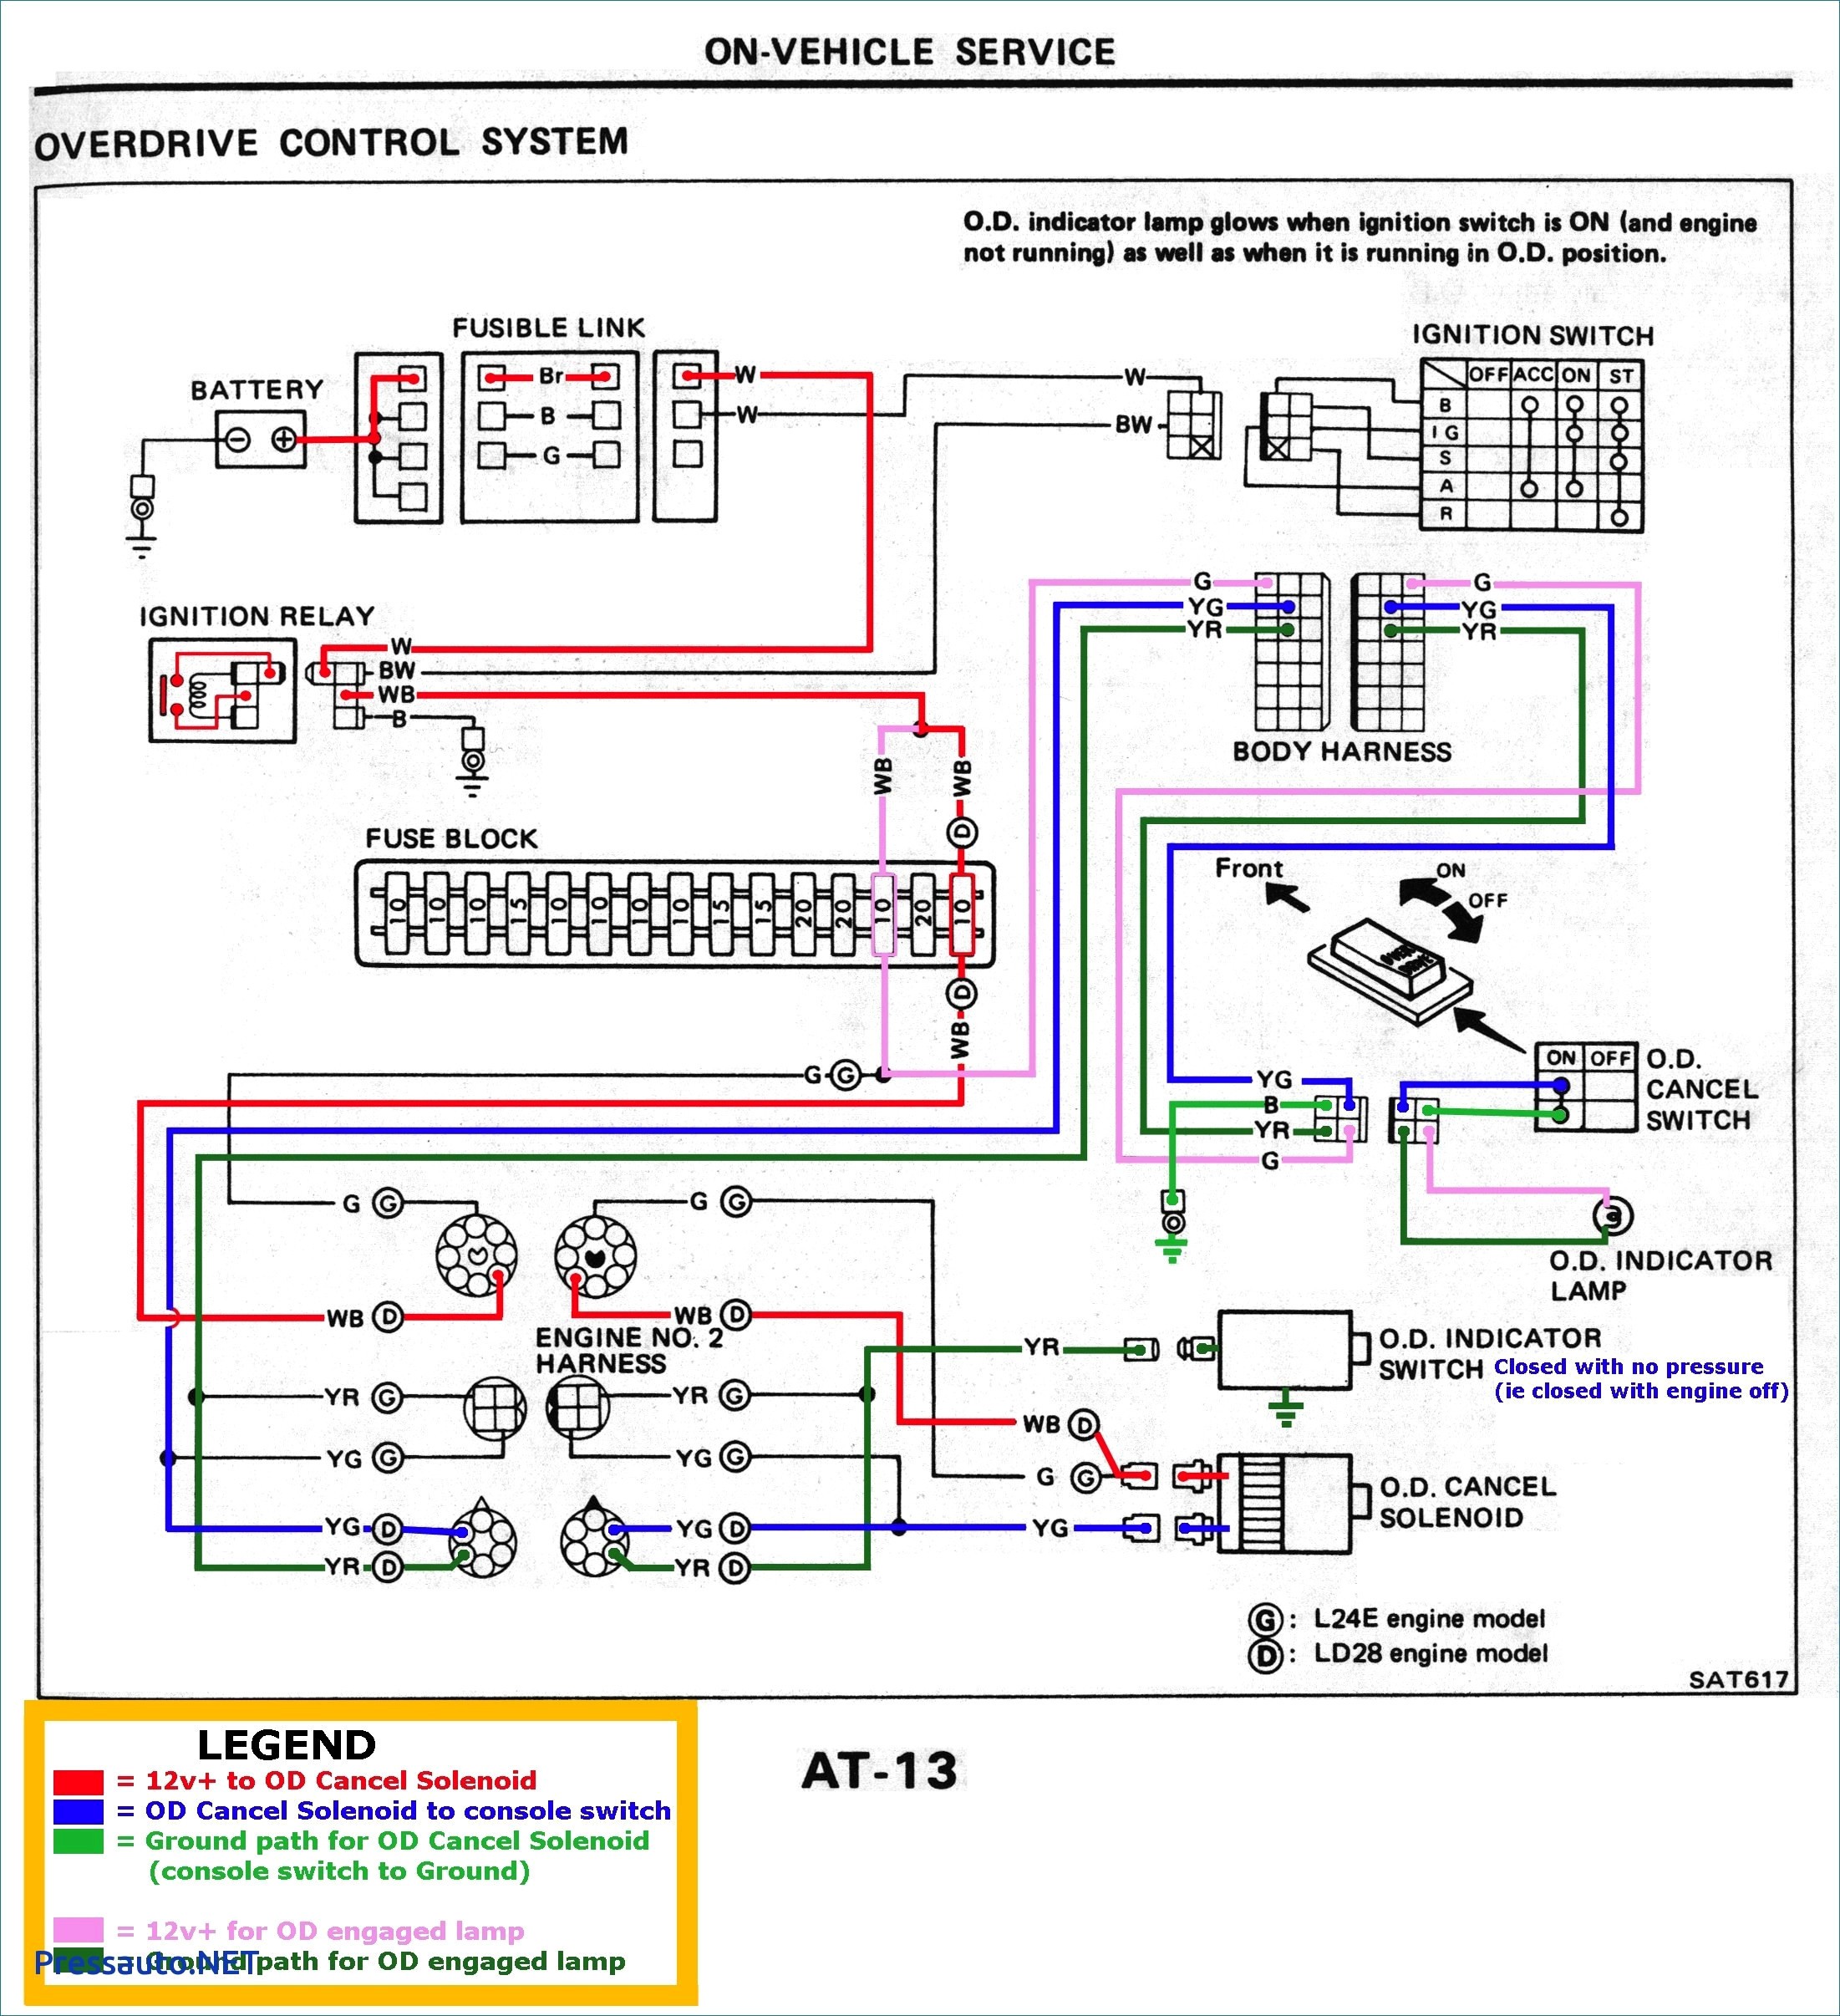 Car Battery Charger Diagram 48 Volt Electric Scooter Wiring Diagram Unique Free Vehicle Wiring Of Car Battery Charger Diagram